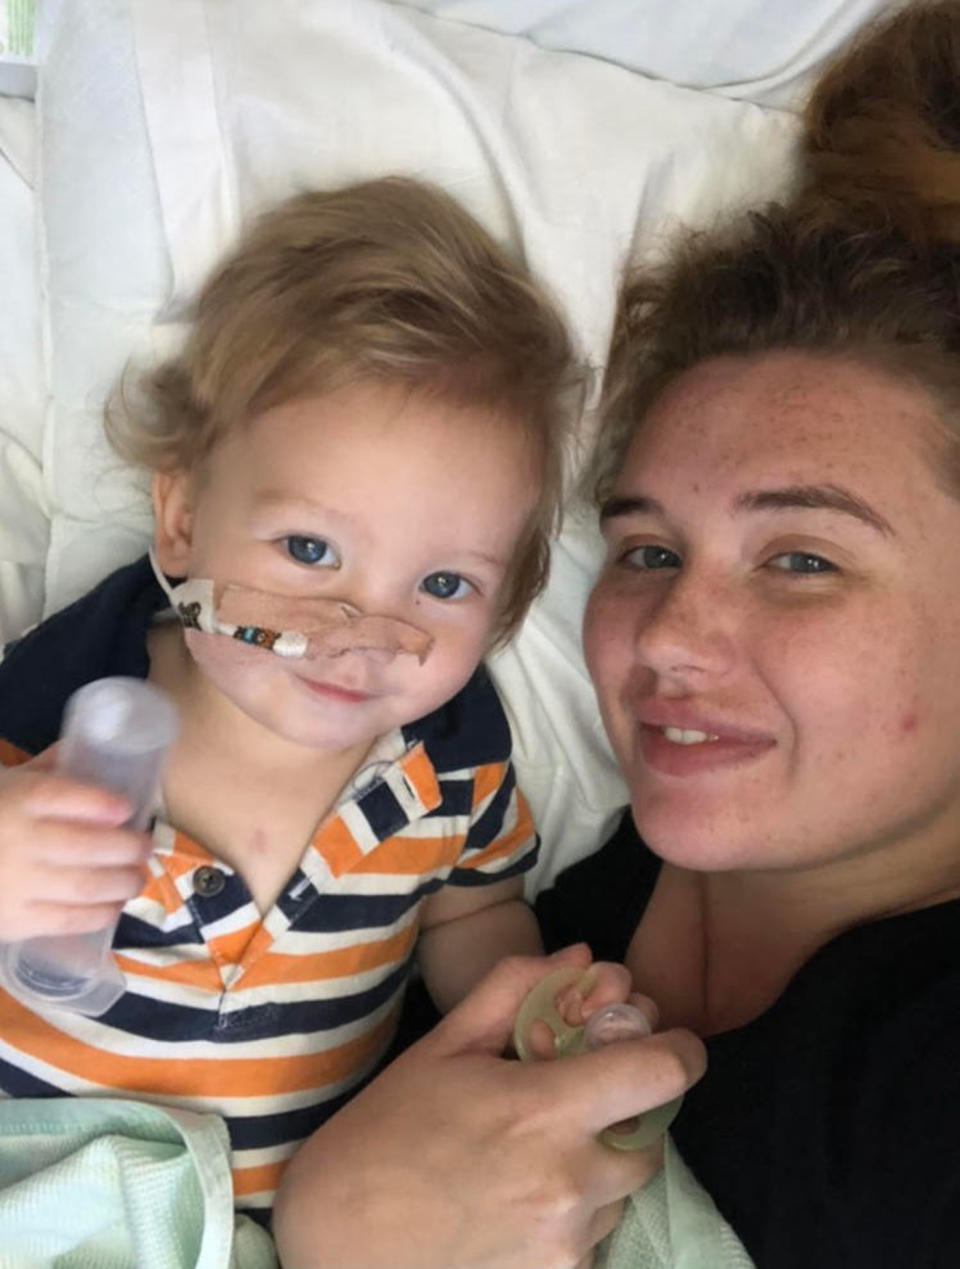 Hollie Phillips pictured with son Ralphie in hospital after he swallowed a button battery. She has shared a TikTok warning.